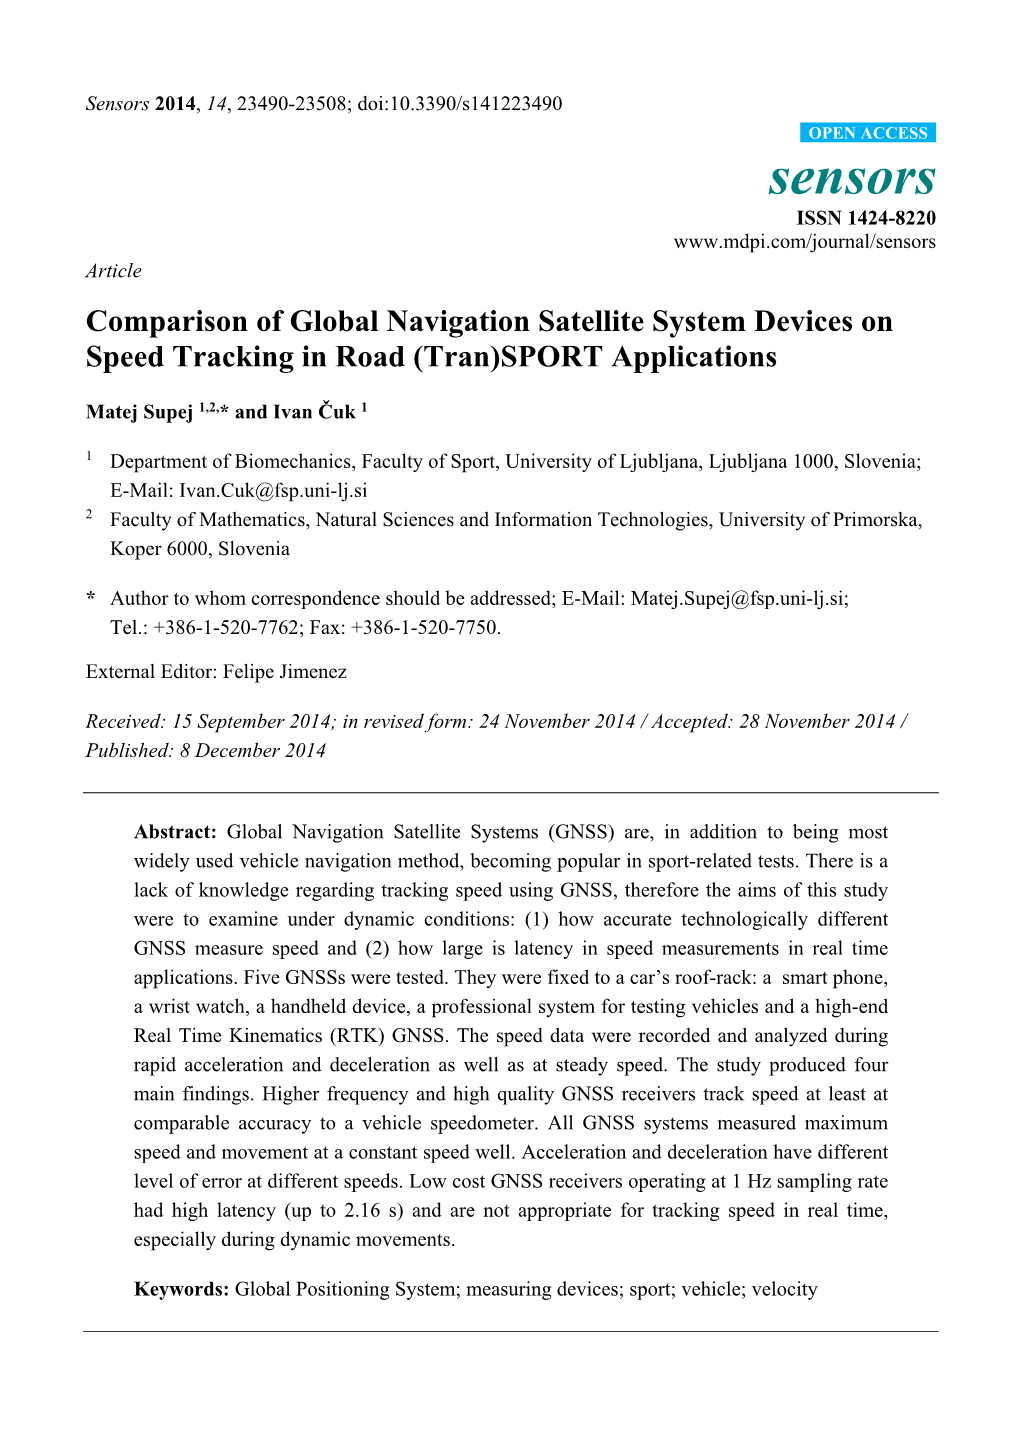 Comparison of Global Navigation Satellite System Devices on Speed Tracking in Road (Tran)SPORT Applications